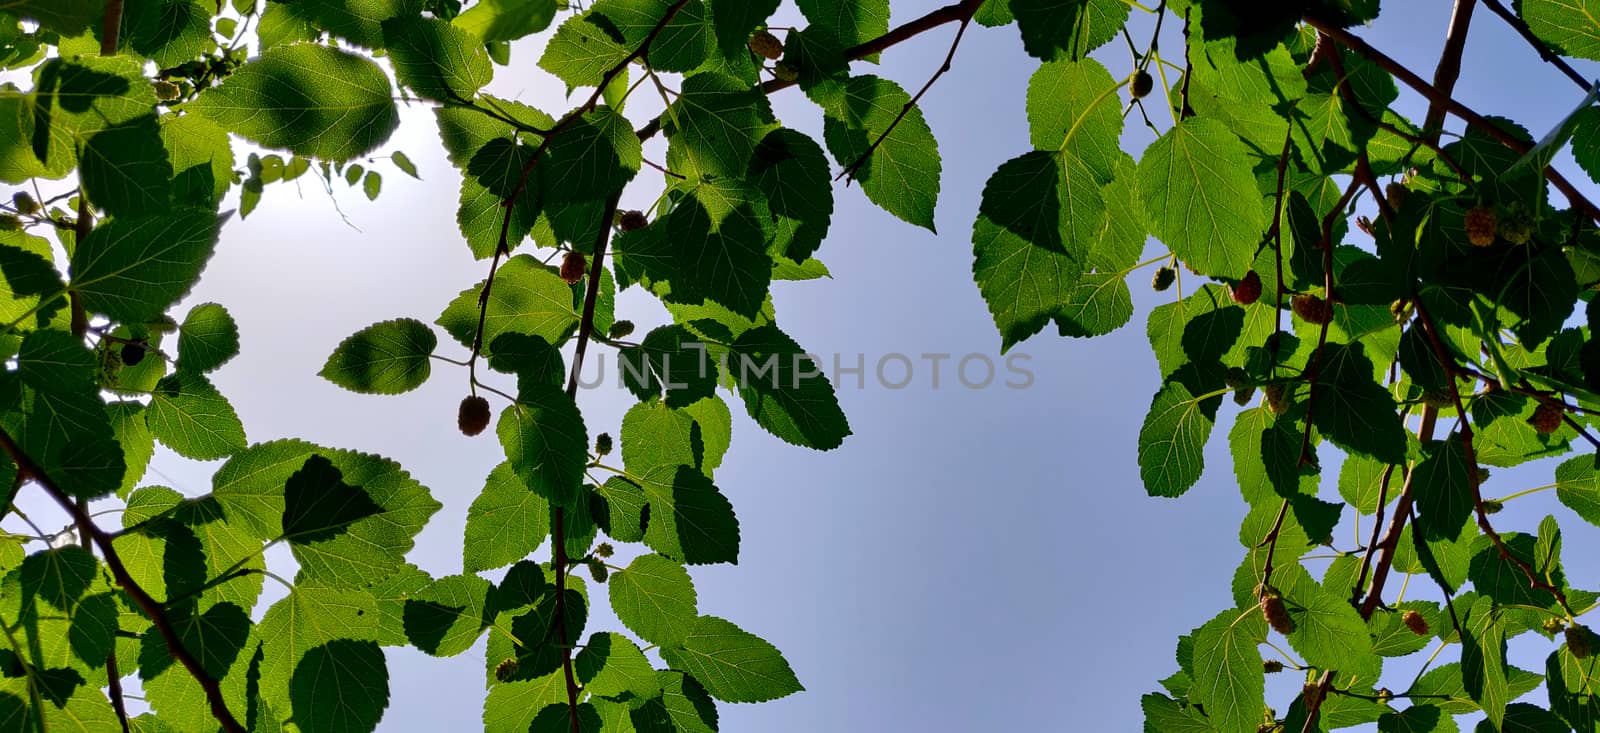 Mulberry tree leaves against sun in afternoon daylight